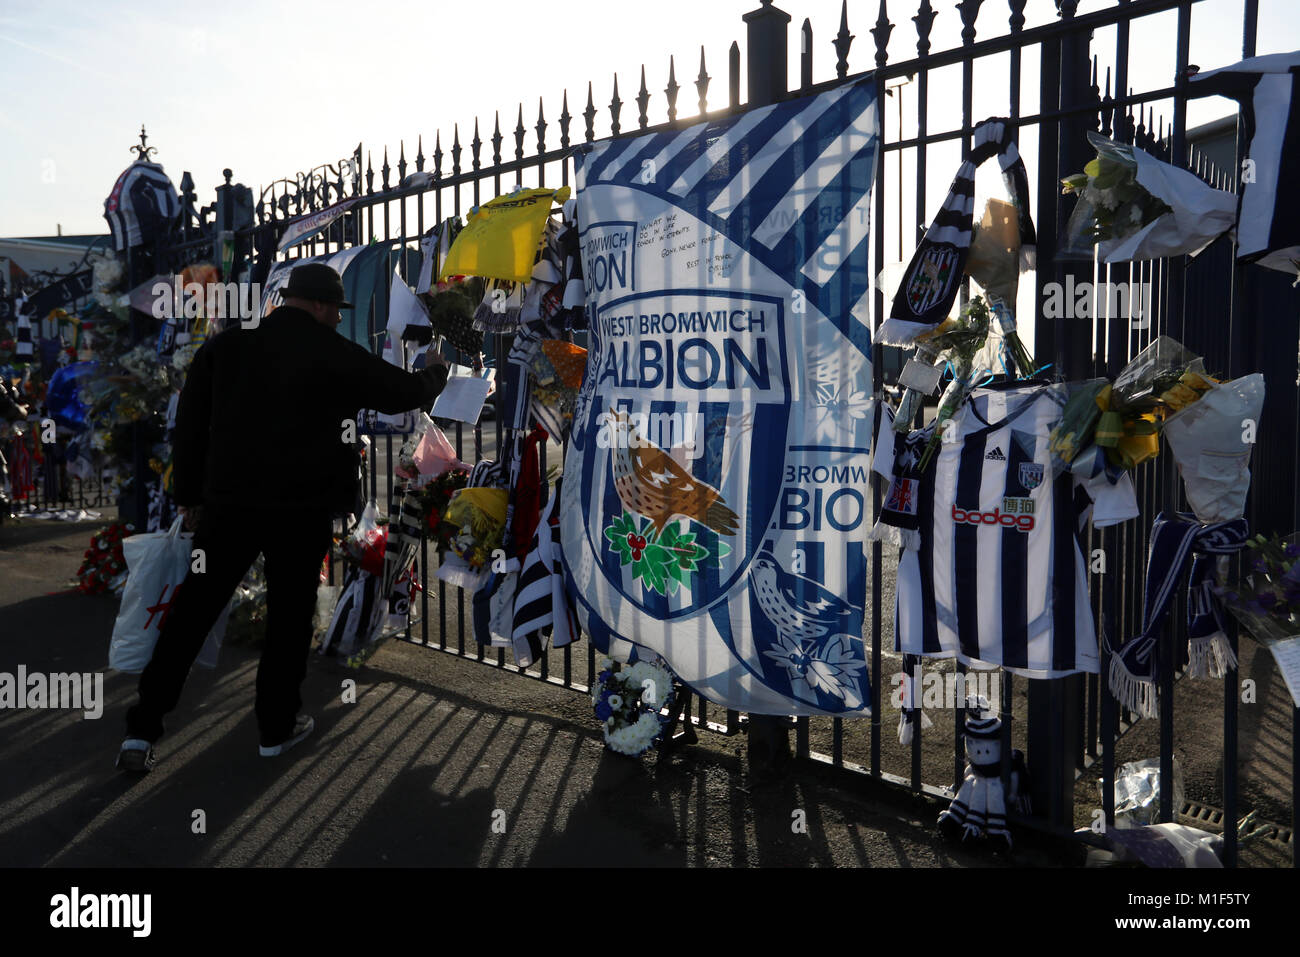 A fan takes a photgraph of tributes laid on the gates during the memorial service for Cyrille Regis at The Hawthorns, West Bromwich. Stock Photo